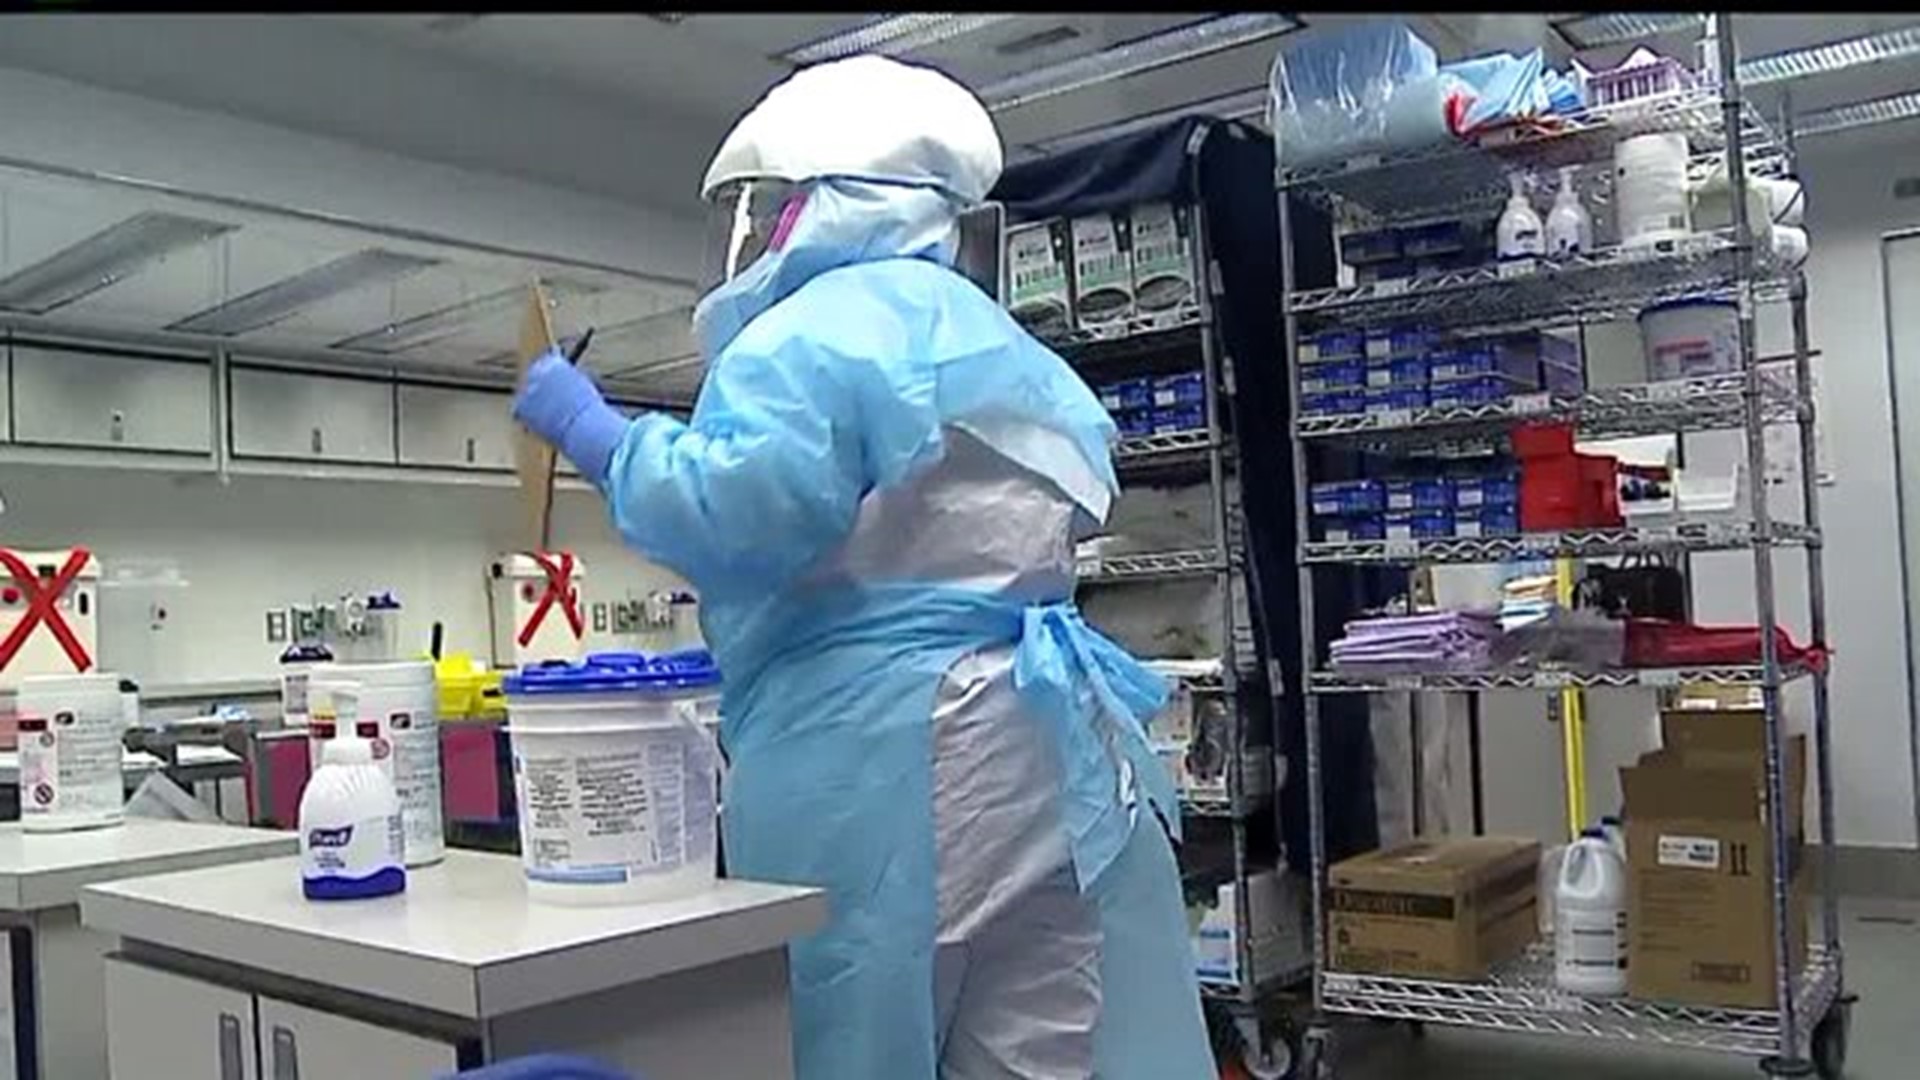 Penn State Hershey Medical Center designated for Ebola patients